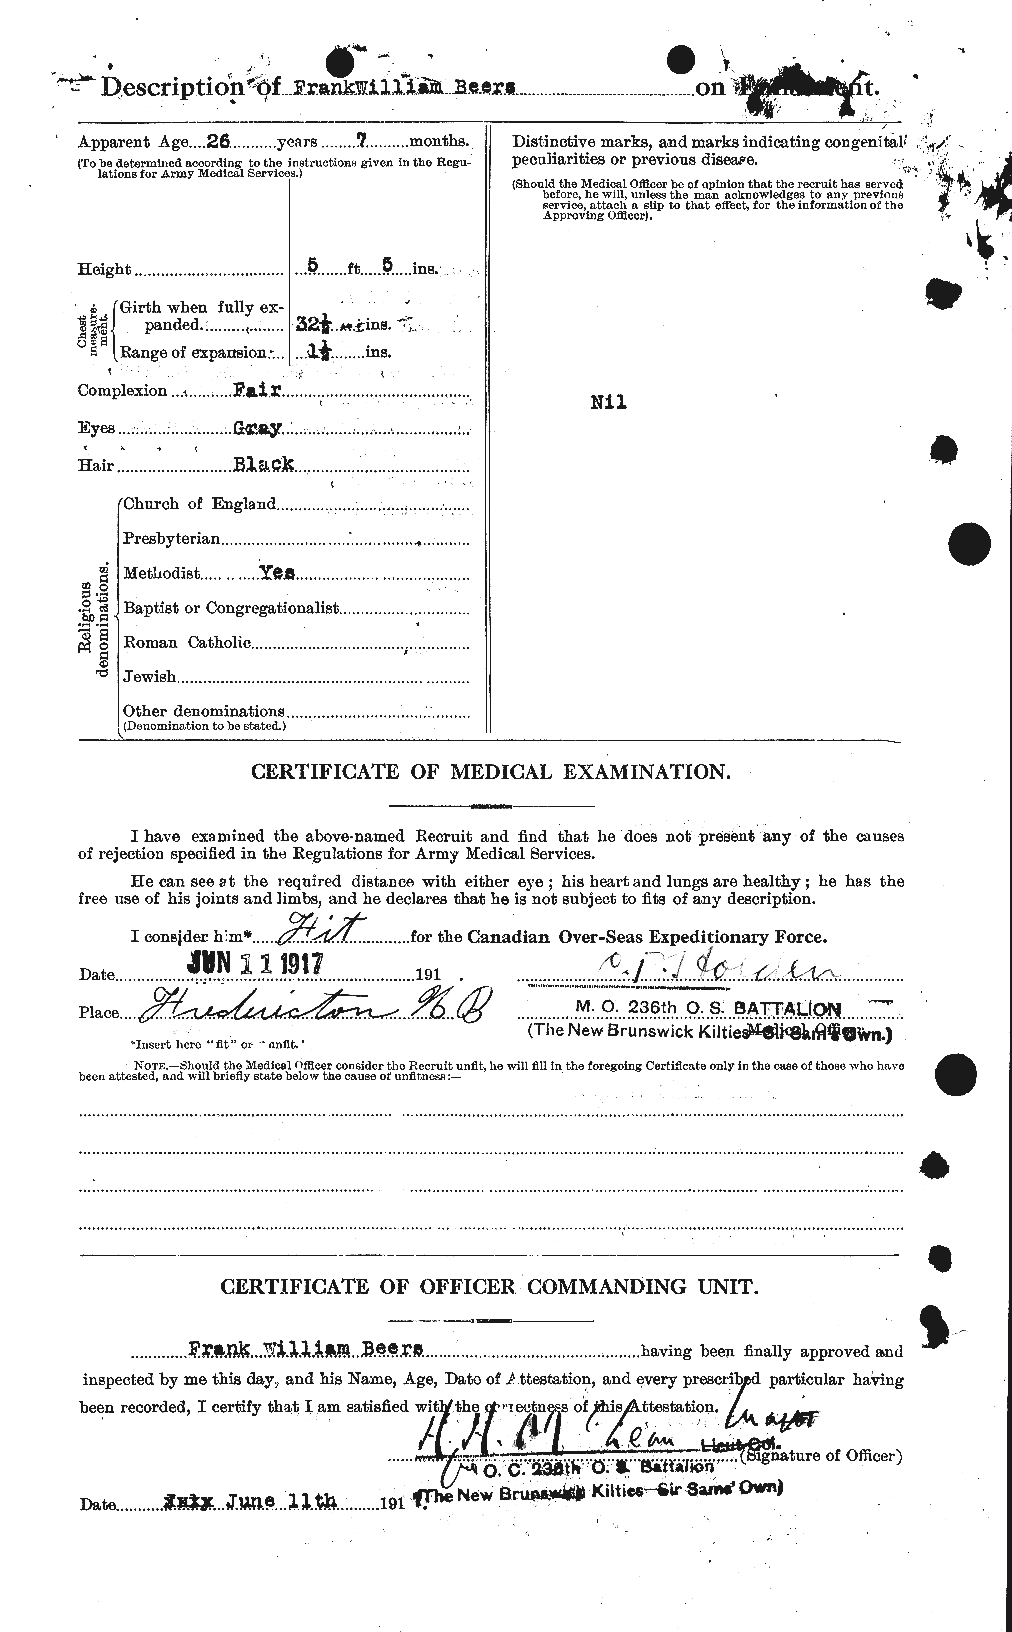 Personnel Records of the First World War - CEF 241597b